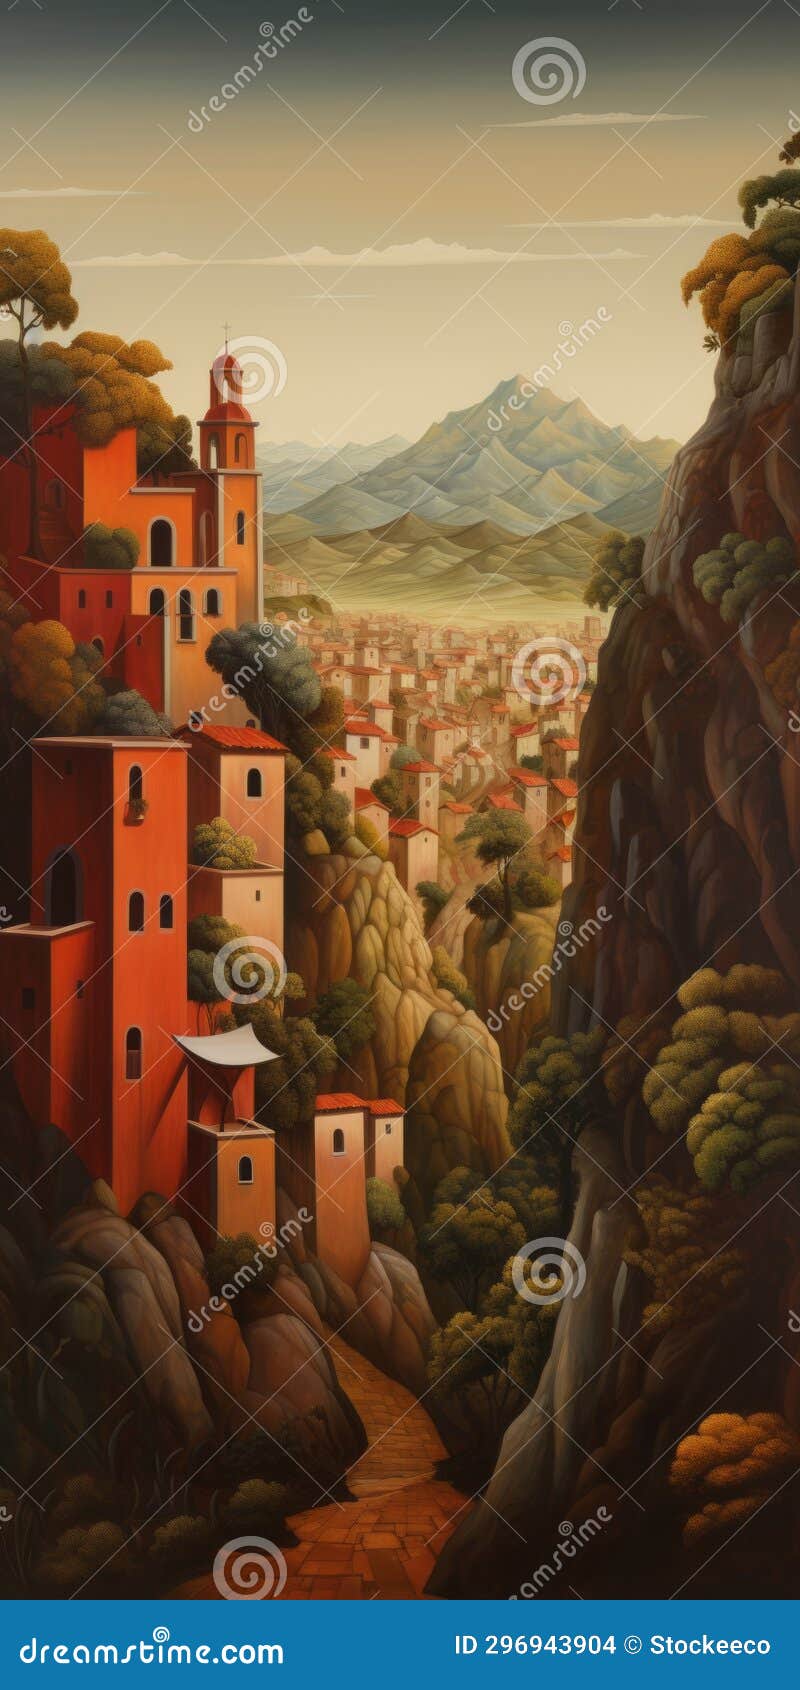 plateau painting of a city in a mountain valley